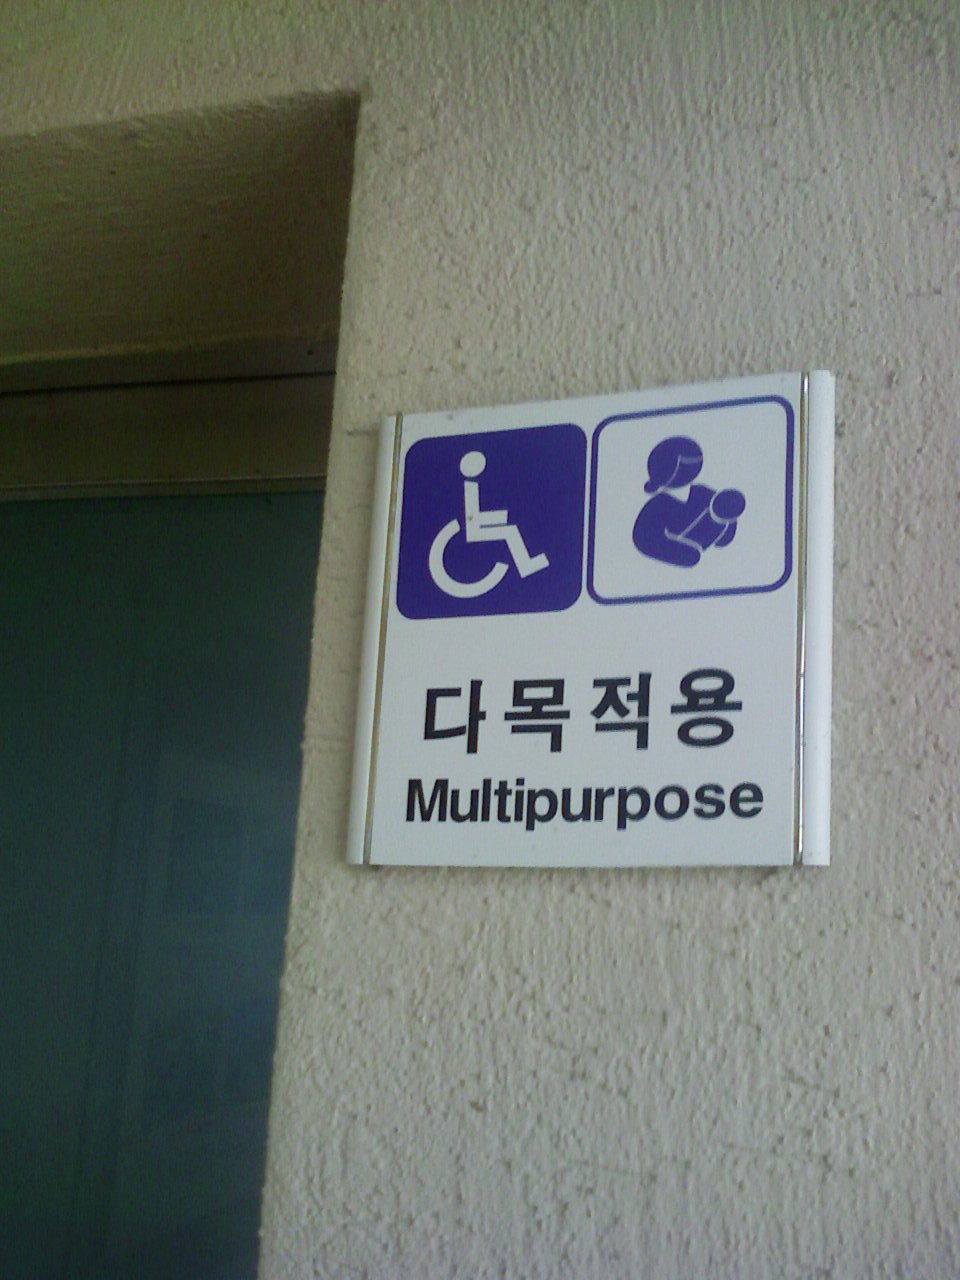 Multipurpose Toilet (for the disabled, the senior, and for diaperring), at ImWon Port